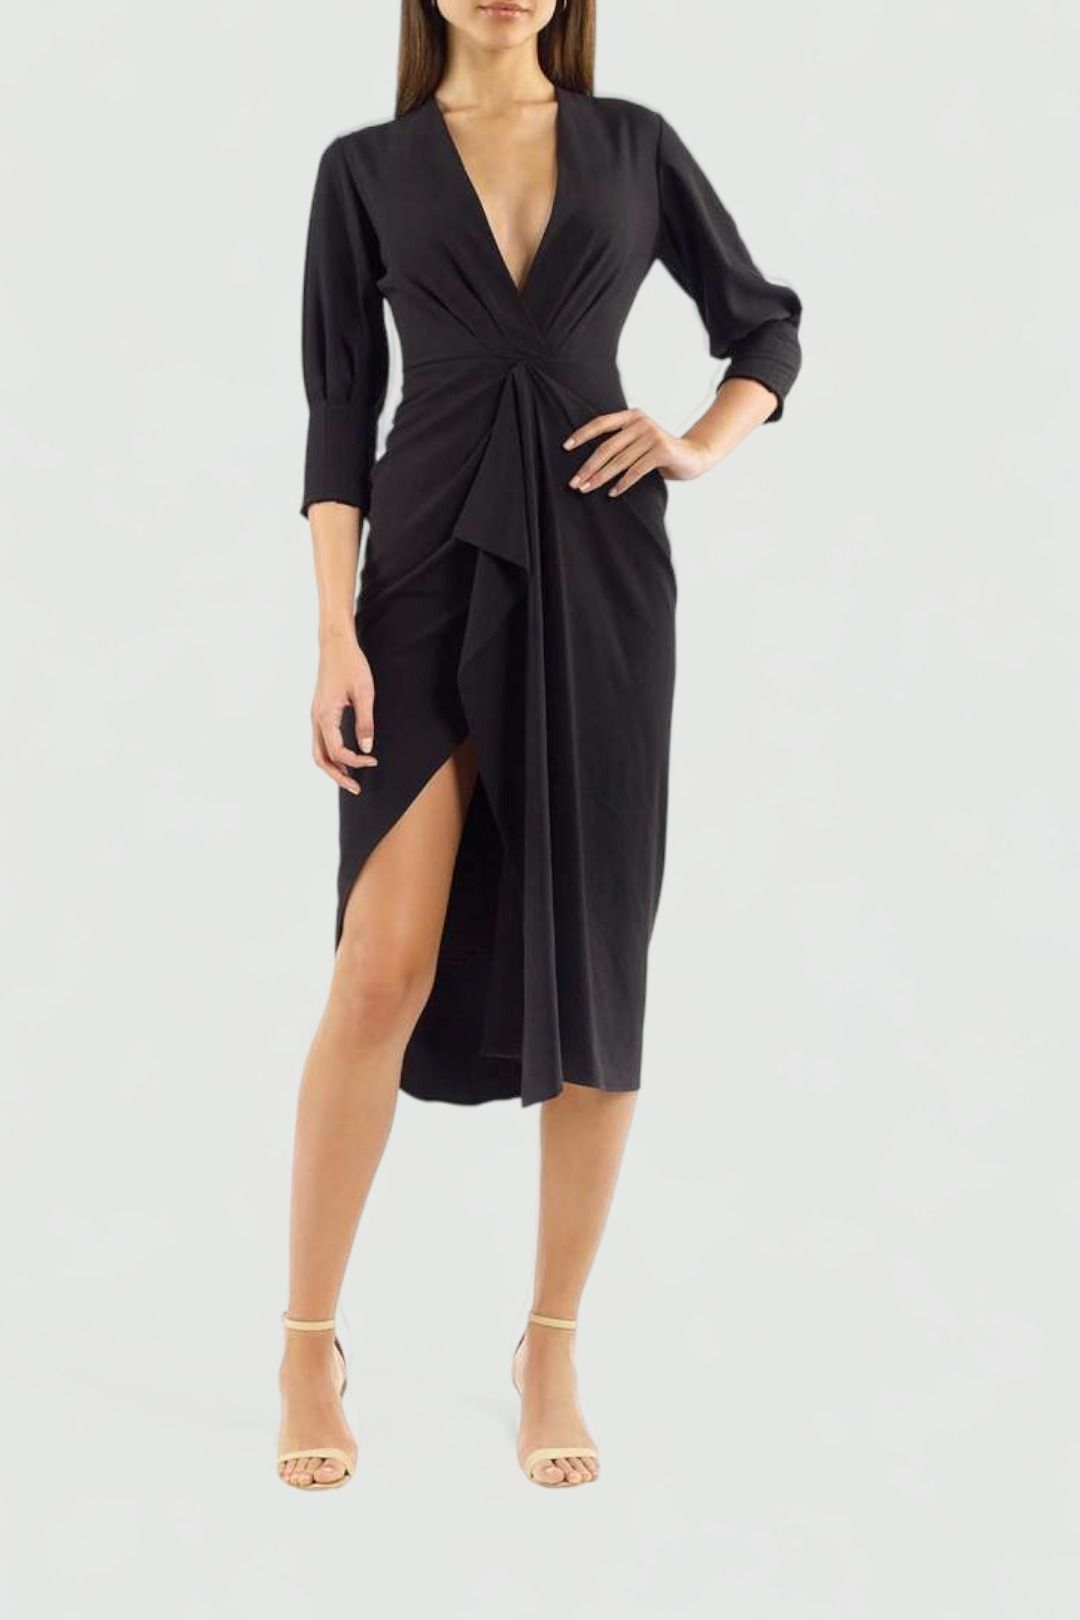 Manning Cartell - Free Fall Dress - Black - Front